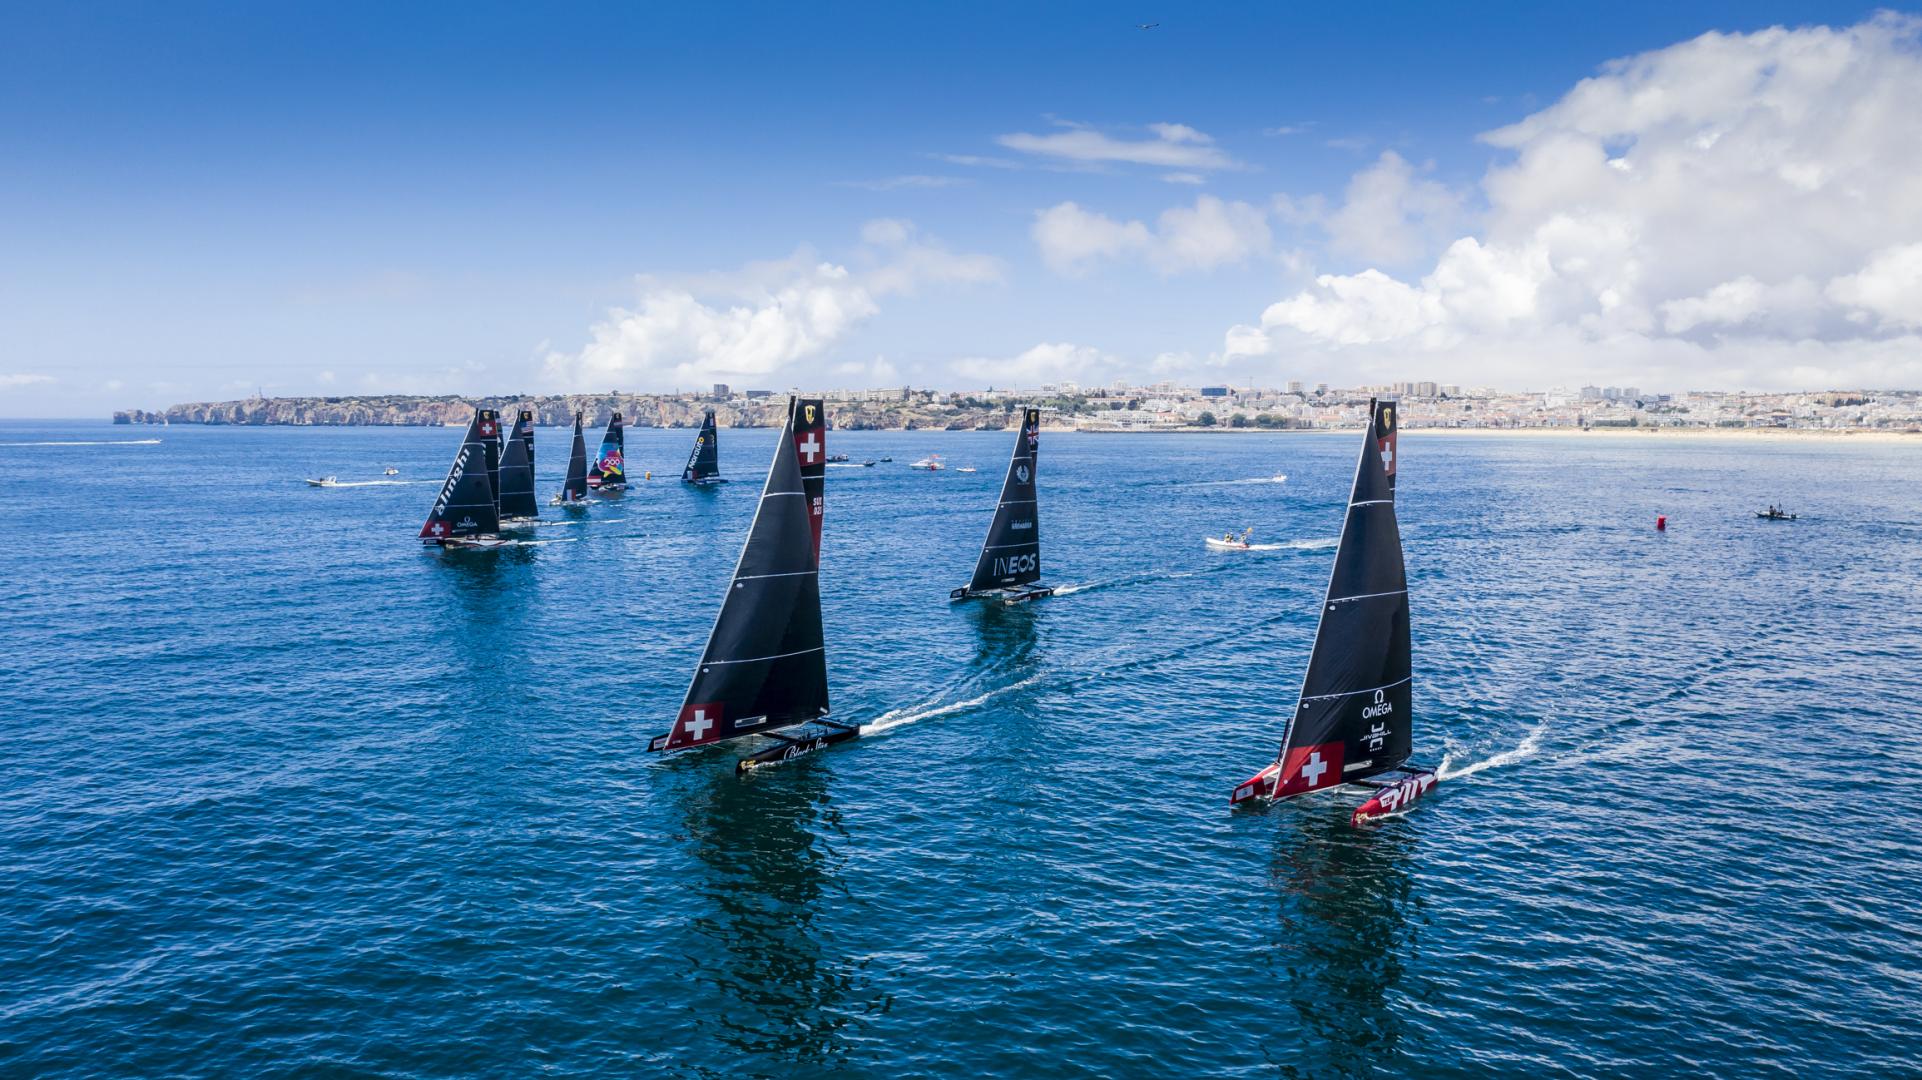 The ten boat GC32 World Championship fleet had two practice races today, won by Team Tilt and NORAUTO